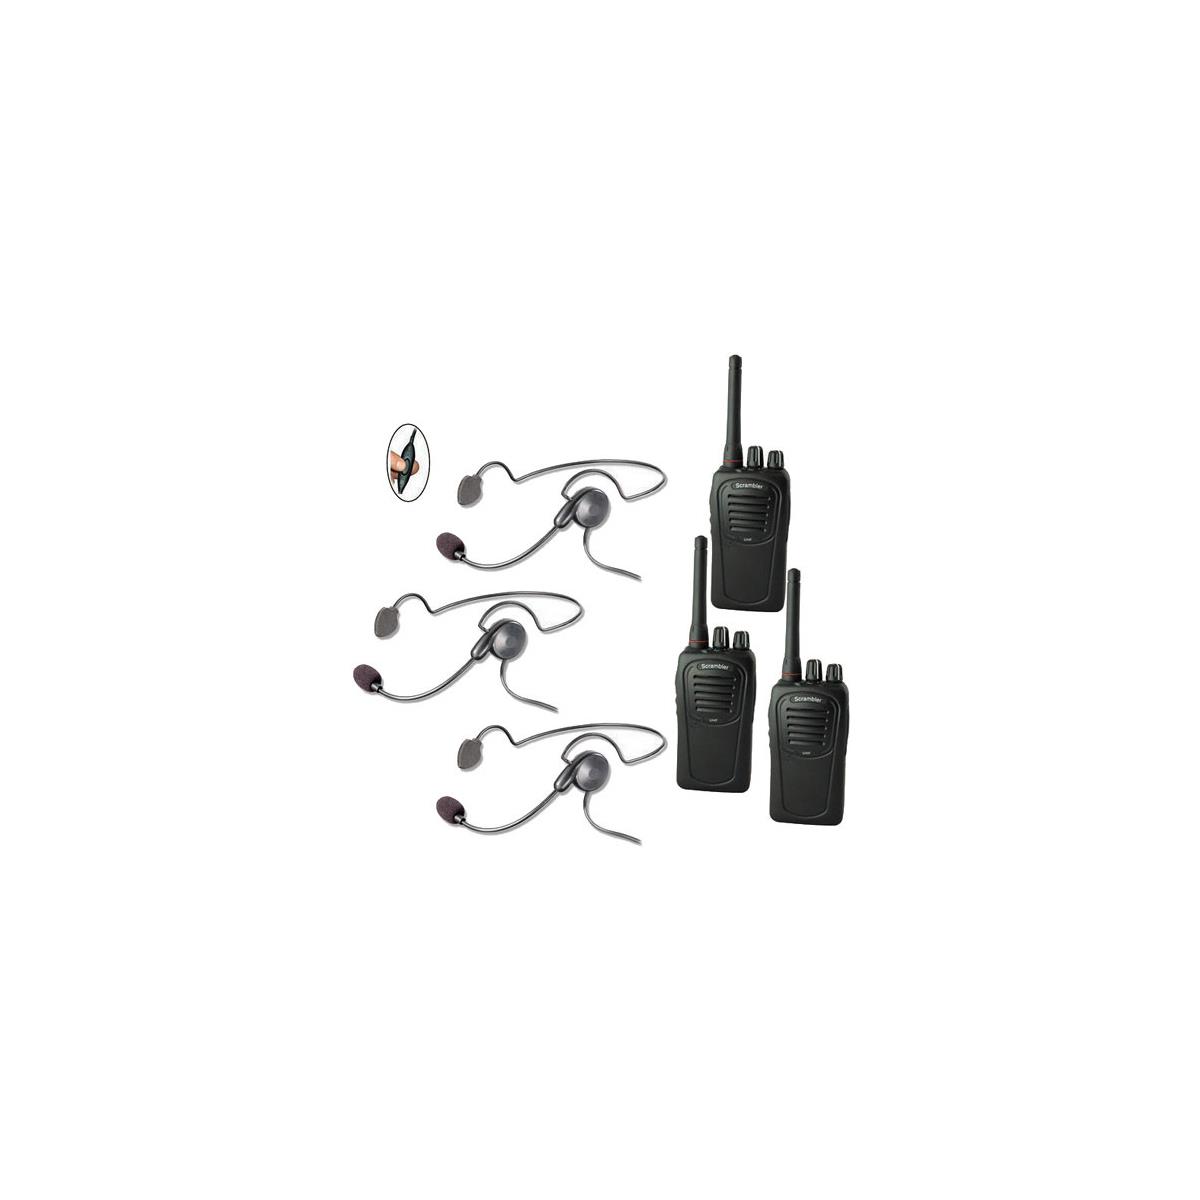 Image of Eartec SC-1000 3-User Two-Way Radio System with 3x Cyber Inline PTT Headsets